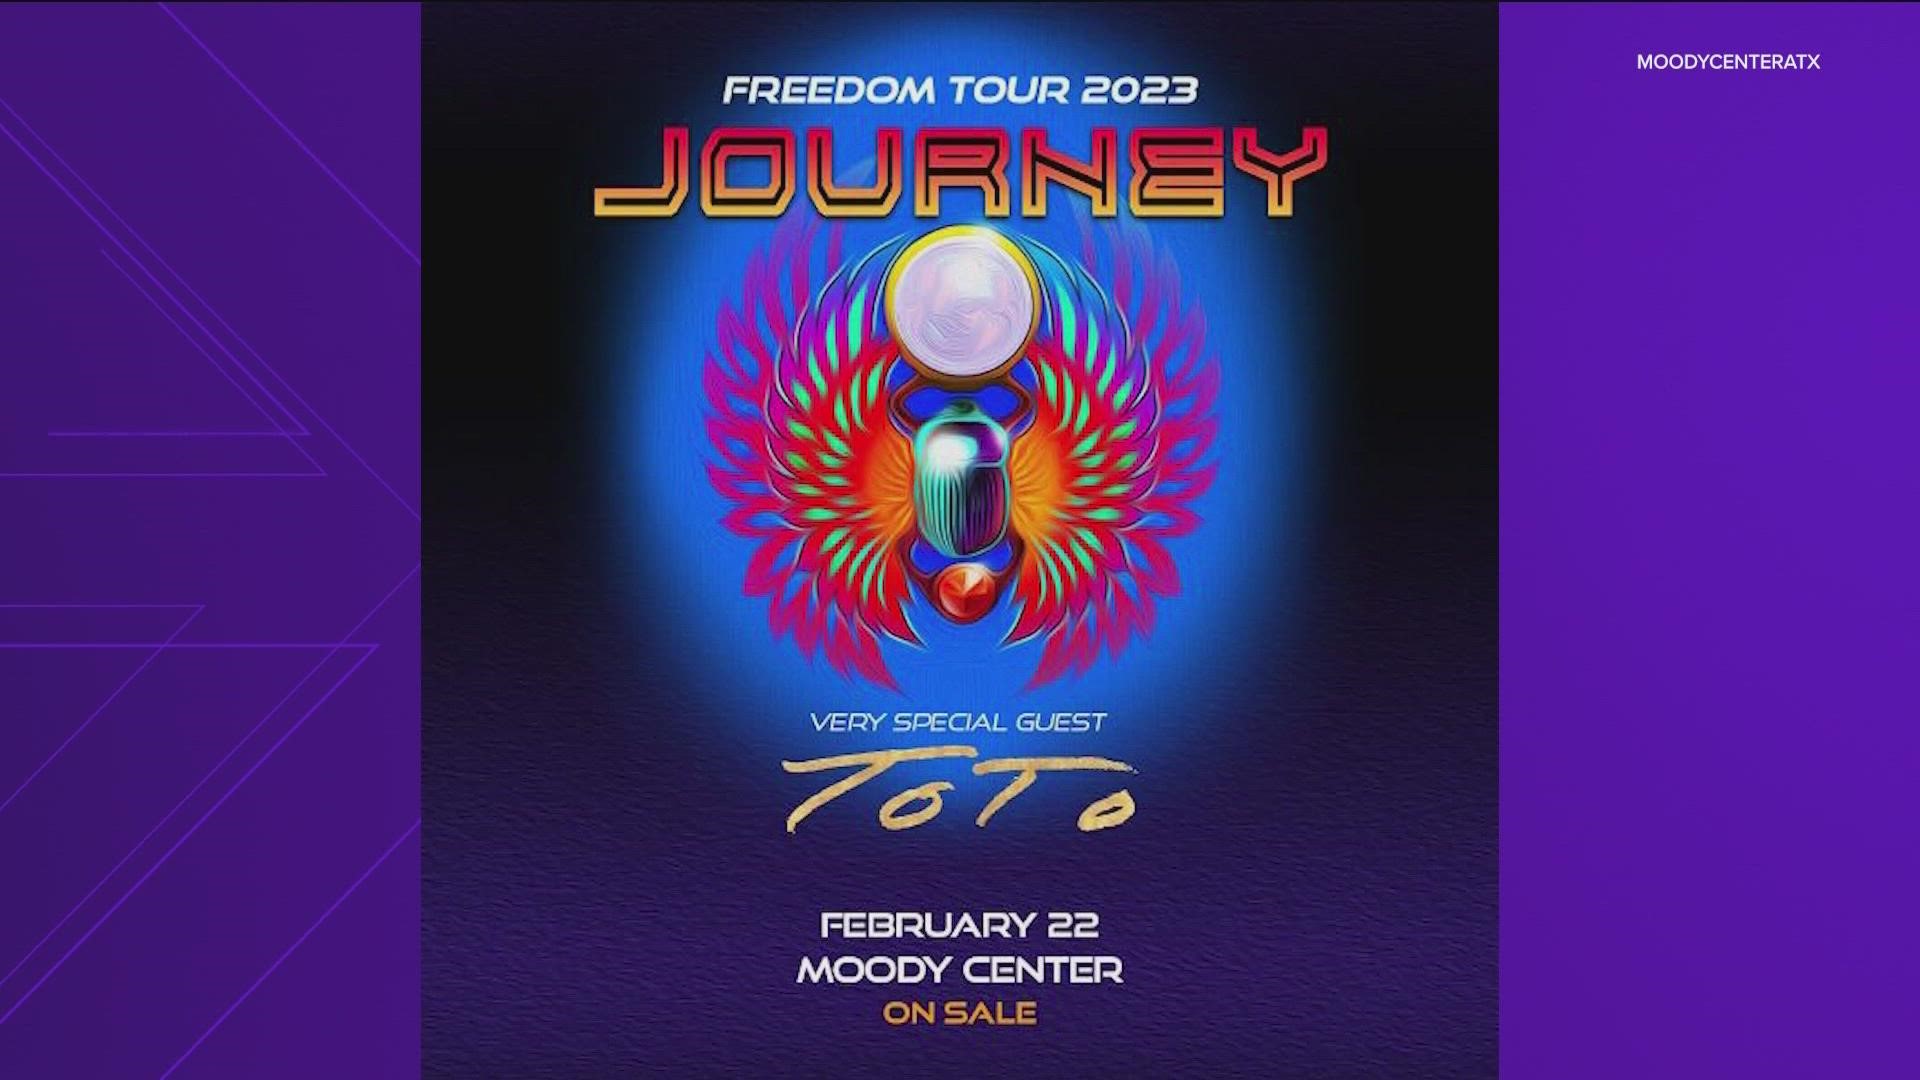 The band Journey will be coming to Austin in February.